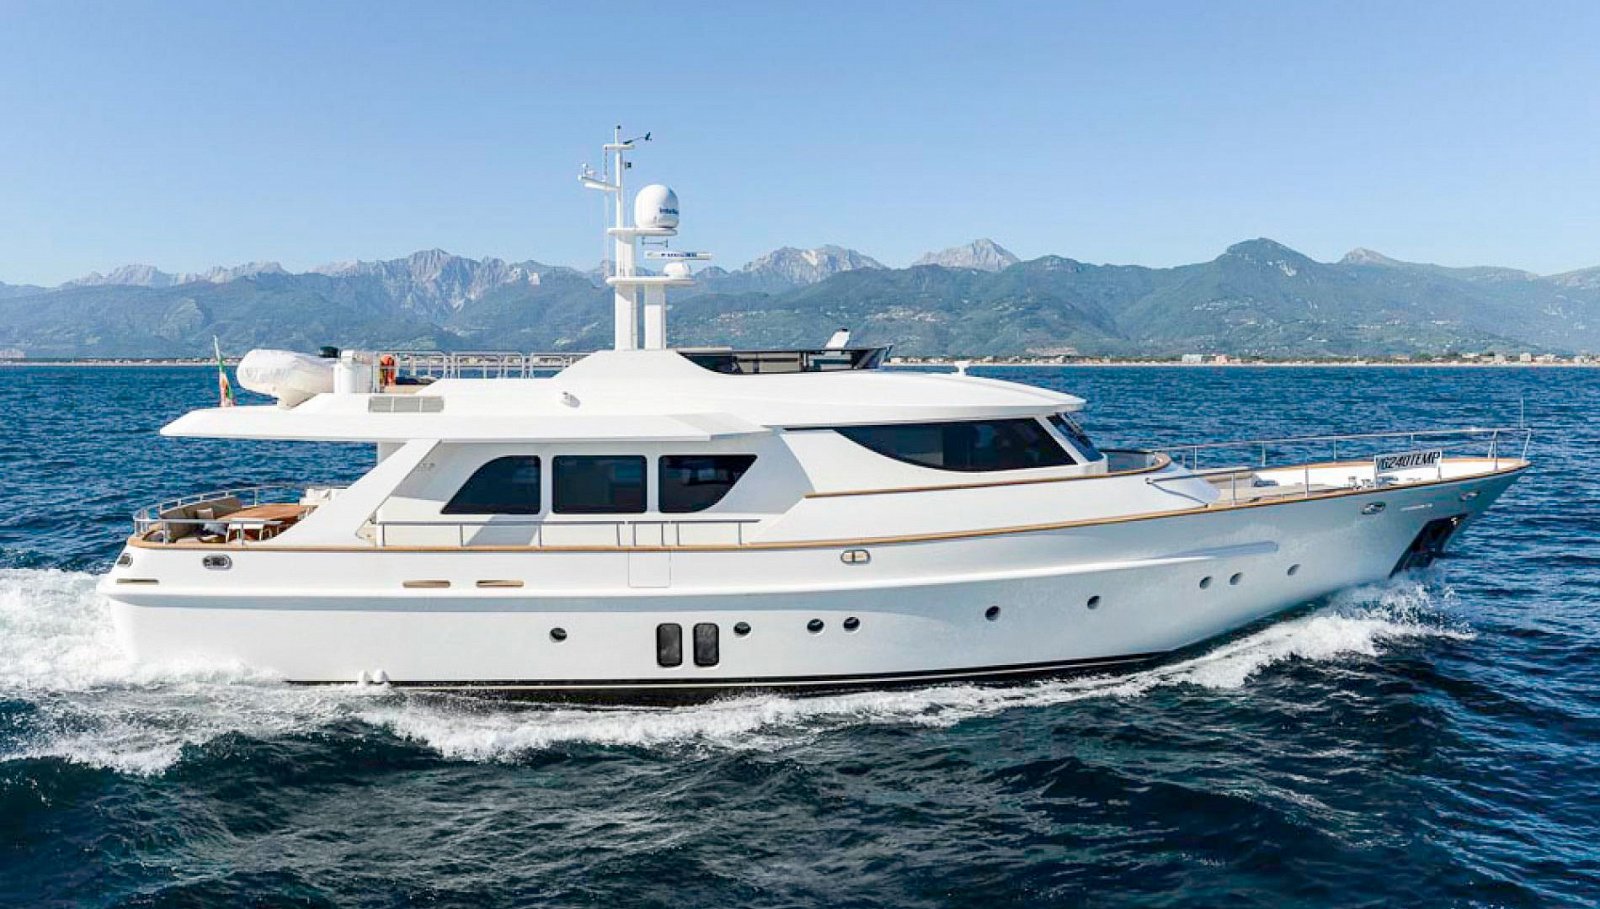 M/Y UNICA listed for sale with YACHTZOO